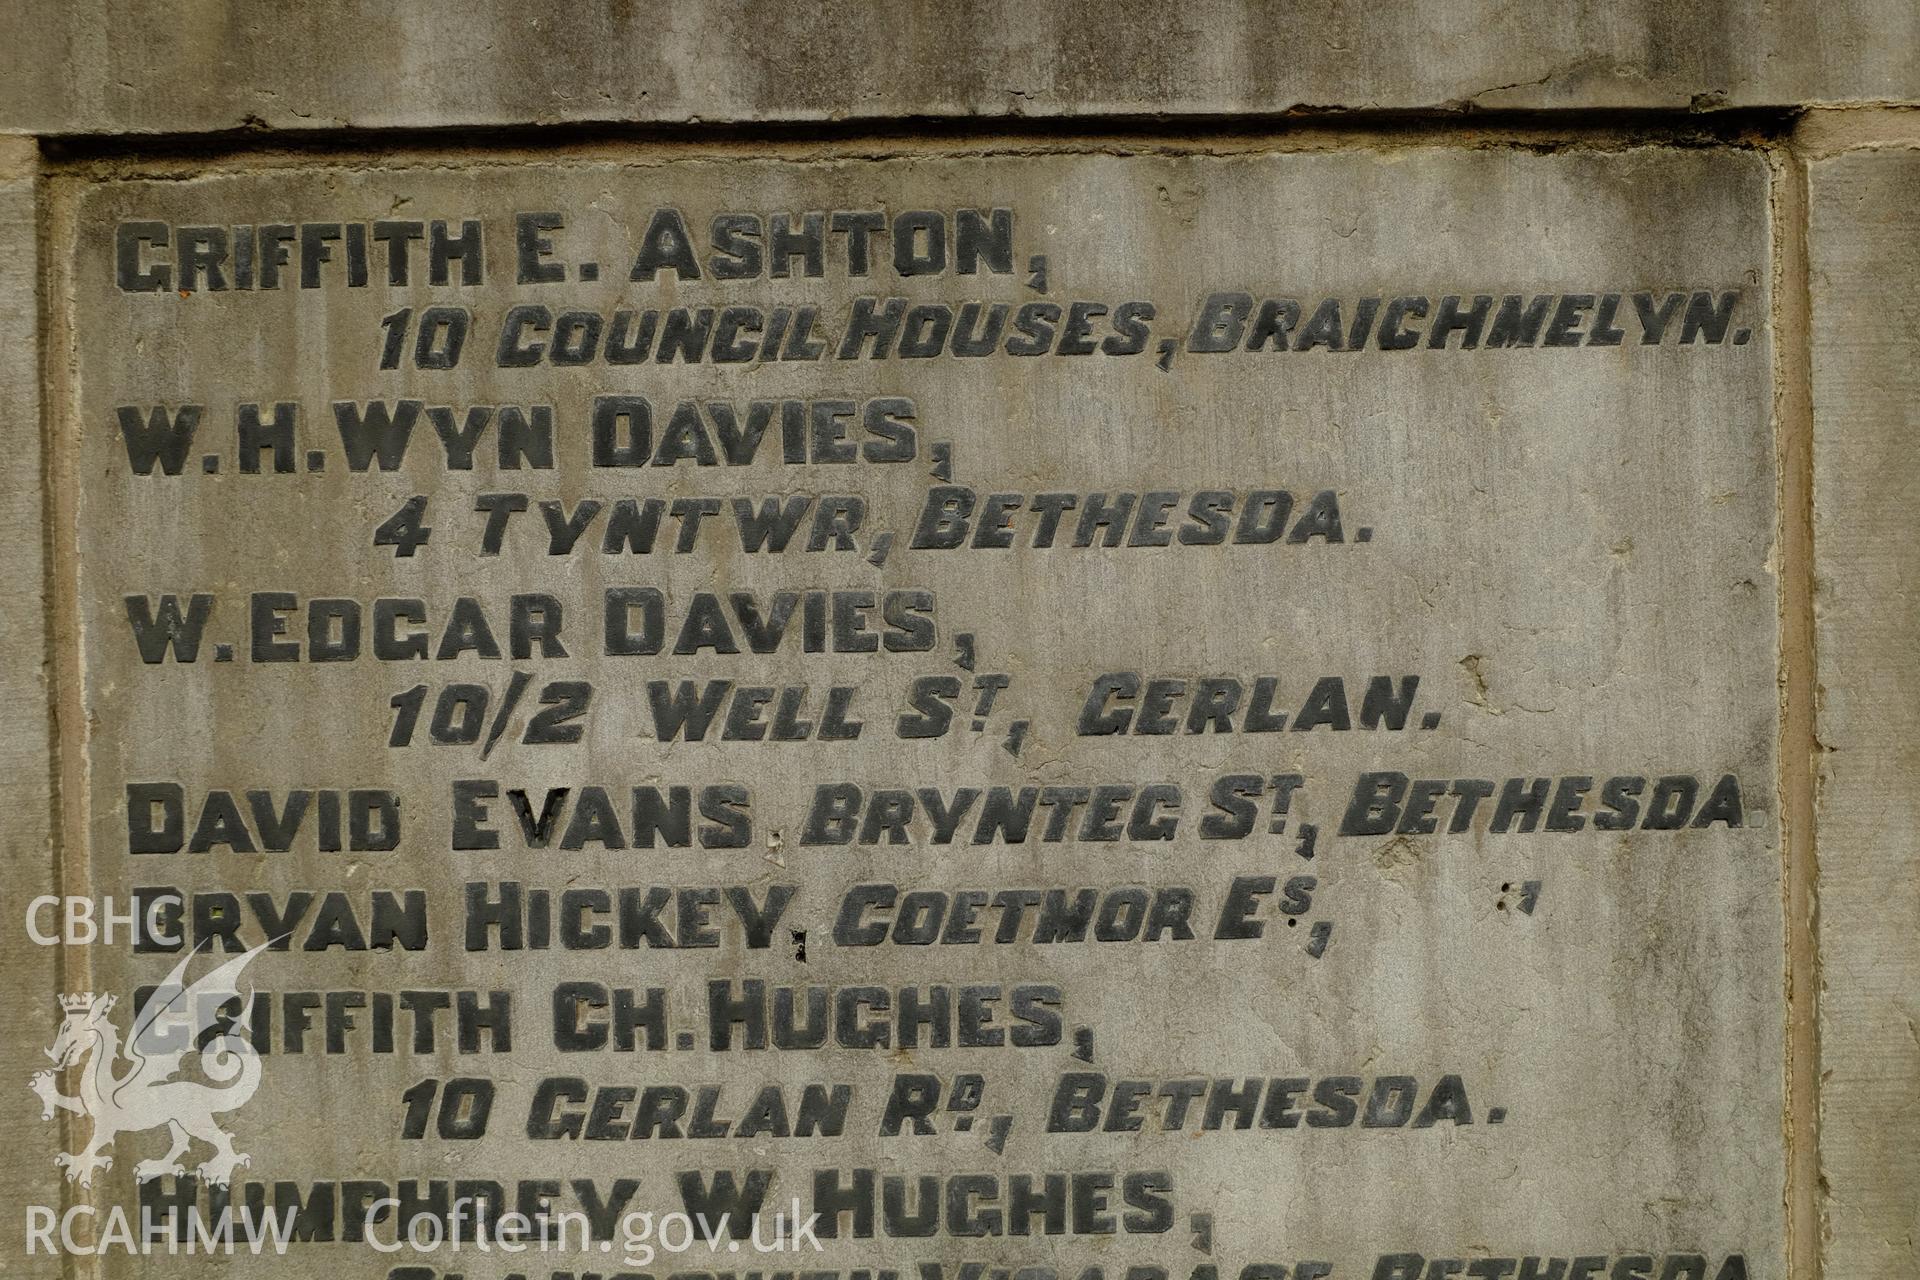 Colour photograph showing detail of Bethesda War Memorial's inscription, produced by Richard Hayman 7th March 2017